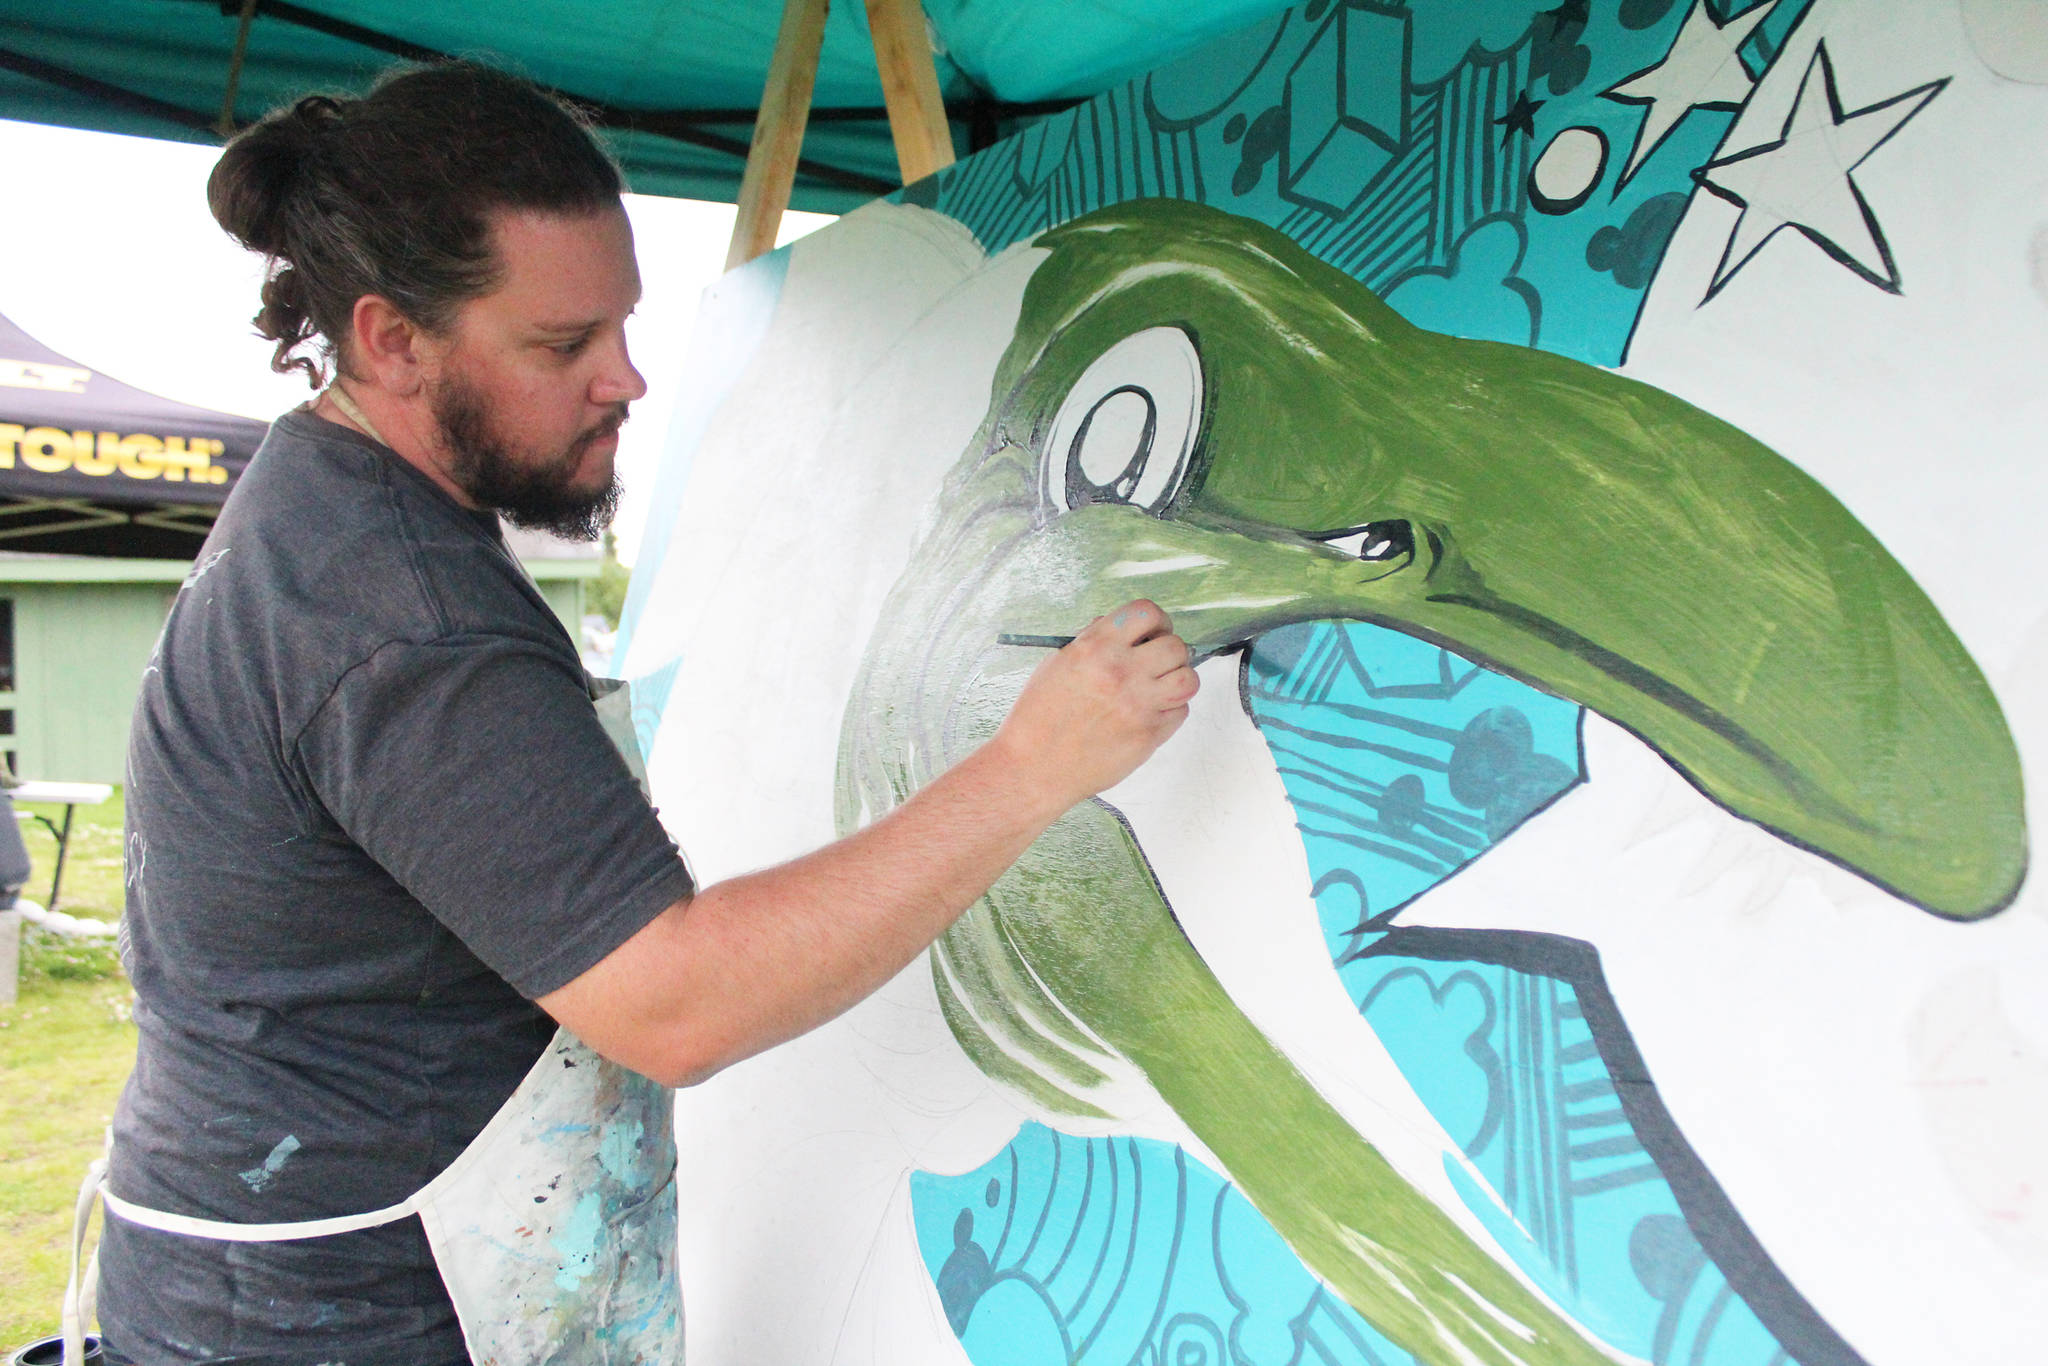 Colorado artist Patrick Maxcy works on a painting of a salmon during a public barbecue at Karen Hornaday Park for Alaska Wild Salmon Day on Friday, Aug. 10, 2018 in Homer, Alaska. Cook Inletkeeper has partnered with The Bunnell Street Arts Center to host Maxcy as artist in residence for August. (Photo by Megan Pacer/Homer News)